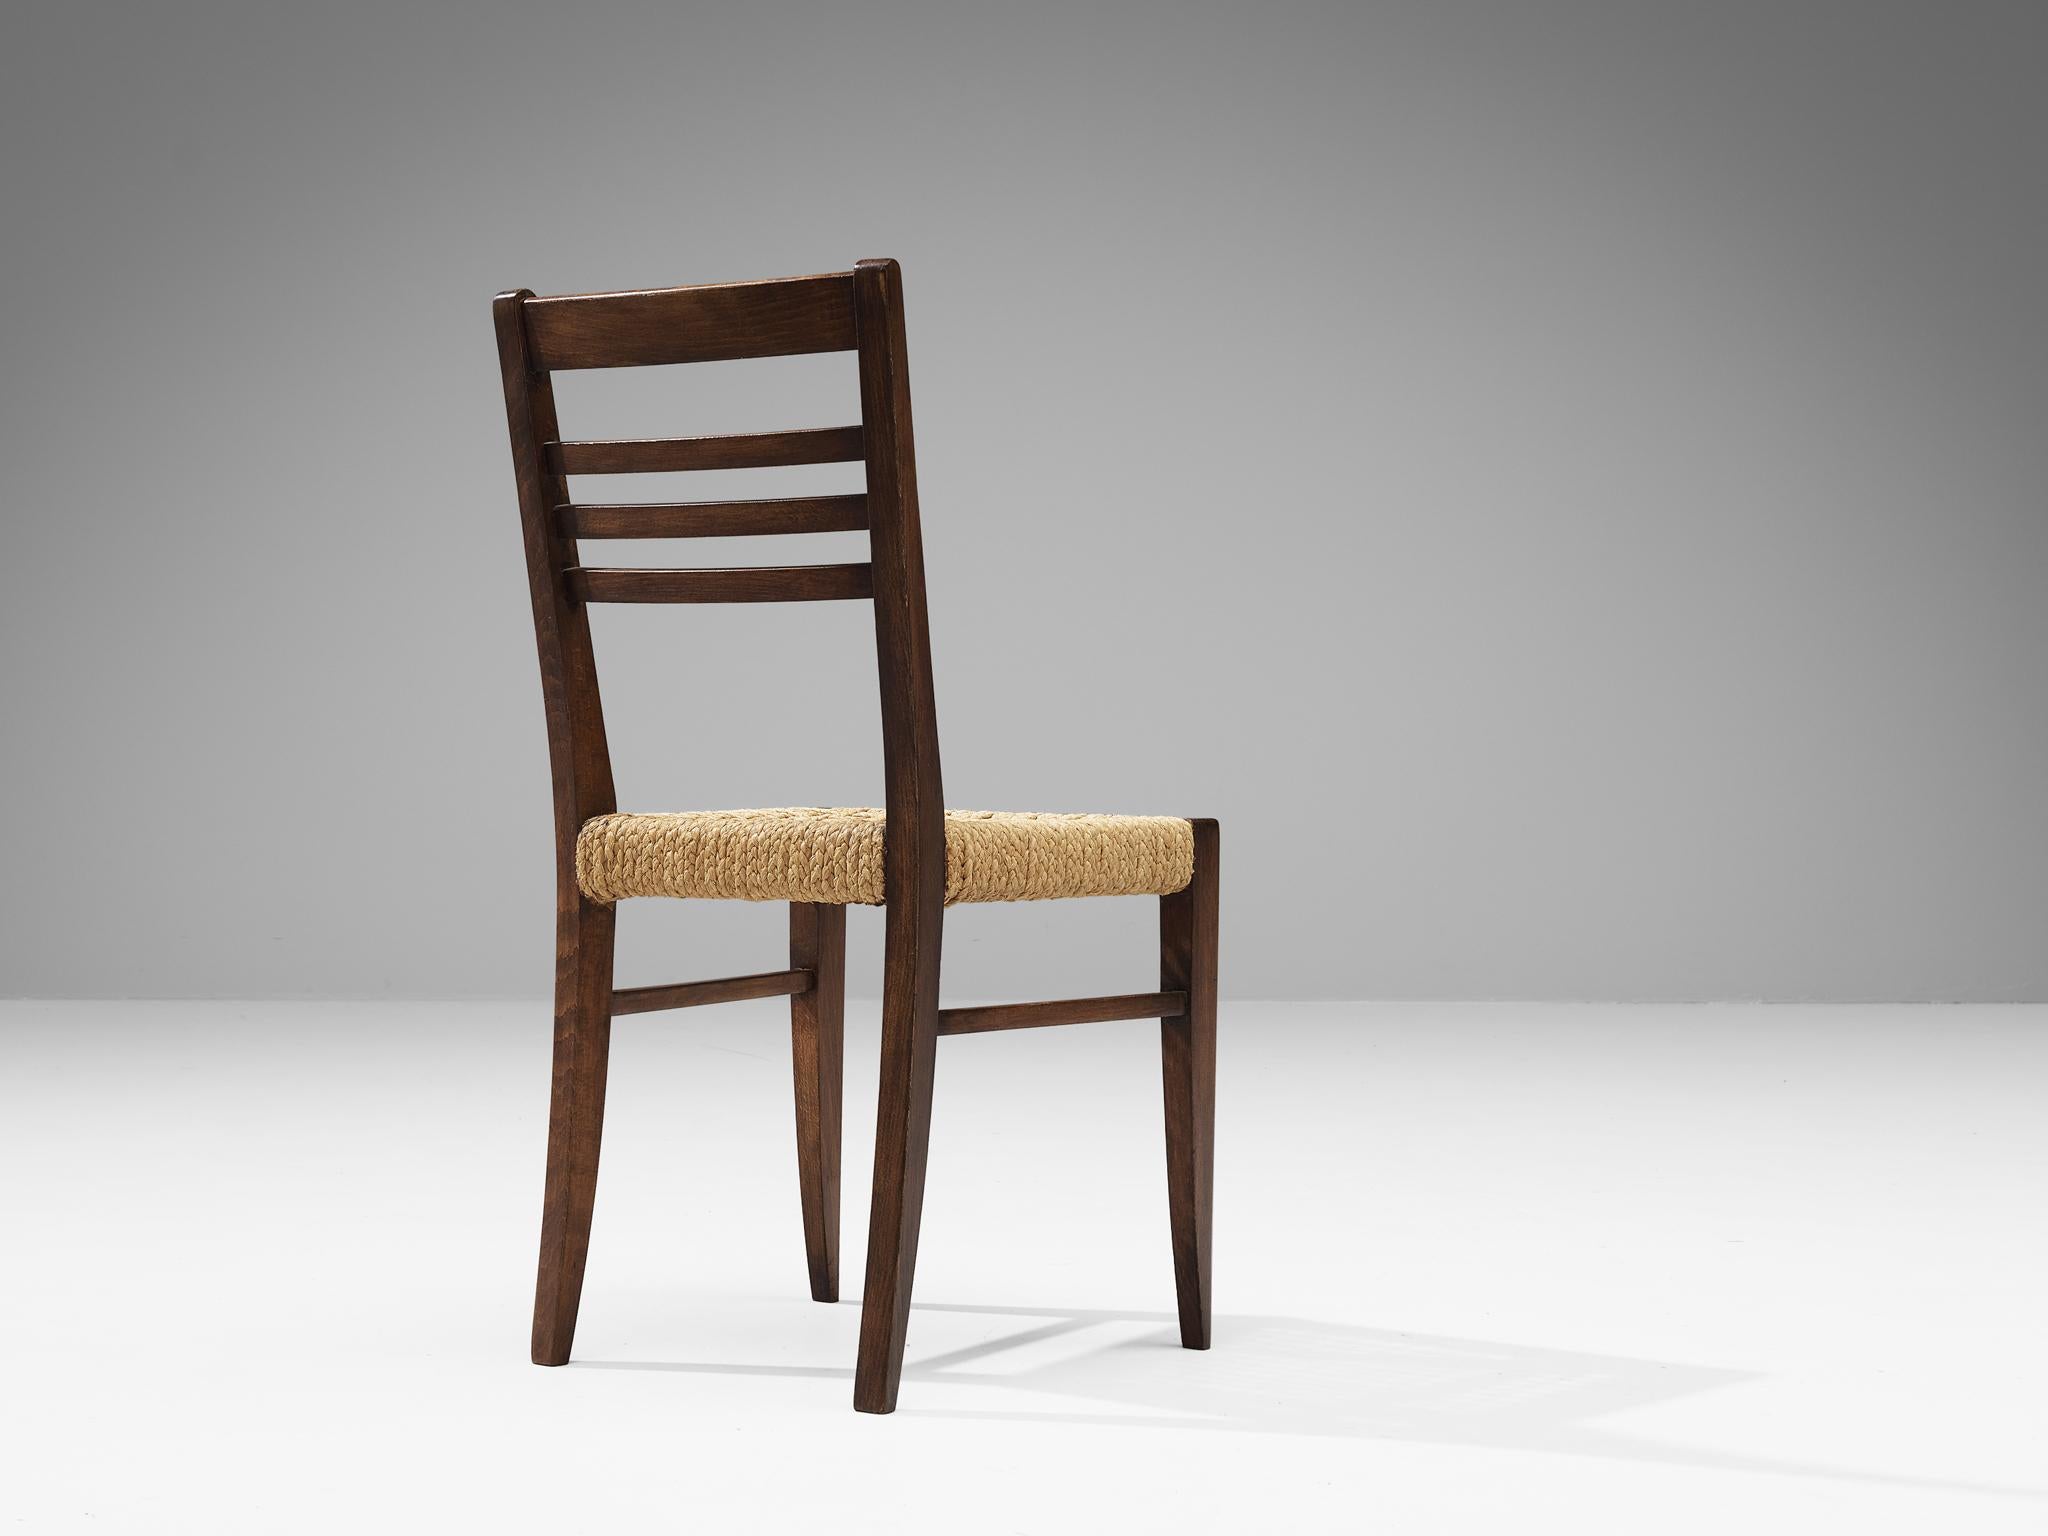 French Adrien Audoux & Frida Minet Set of Eight Dining Chairs in Braided Hemp